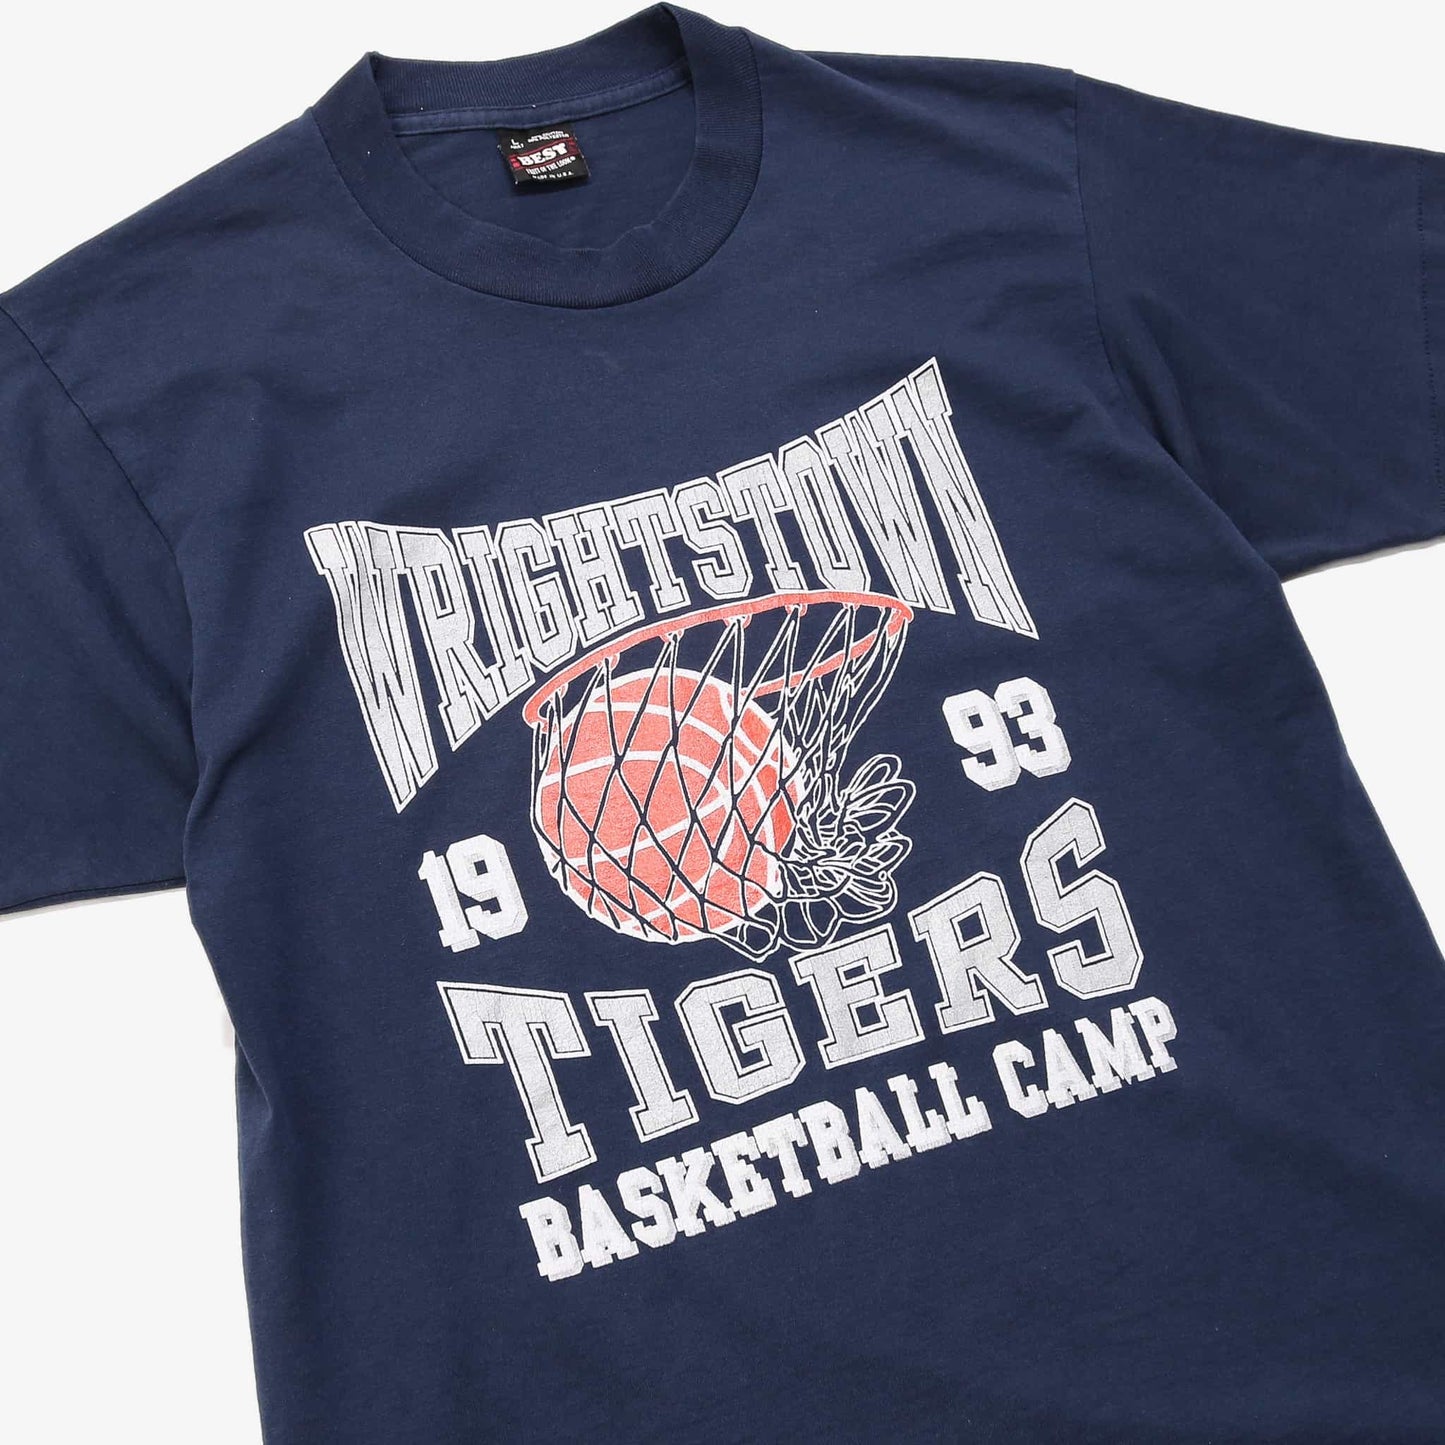 Vintage 'Wrightstown Tigers' T-Shirt - American Madness